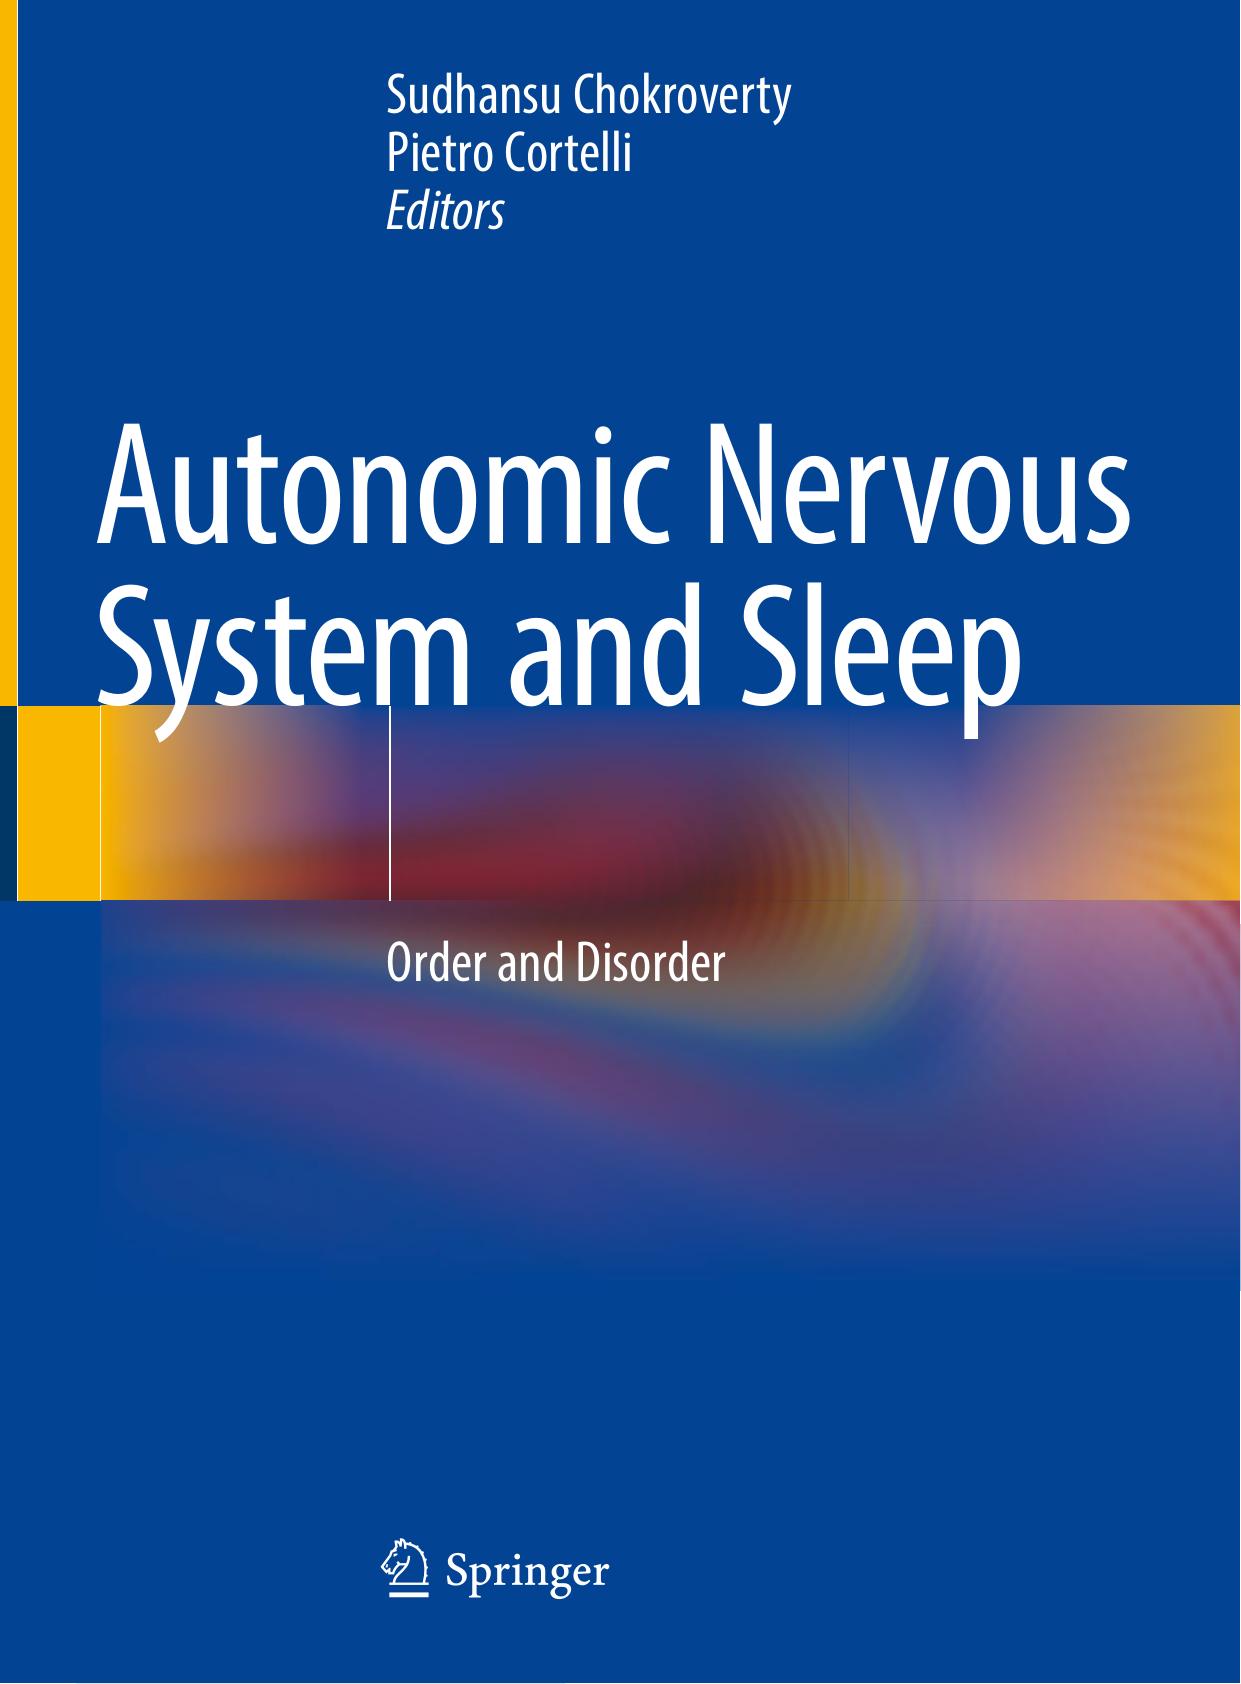 Autonomic Nervous System and Sleep. Order and Disorder 2021